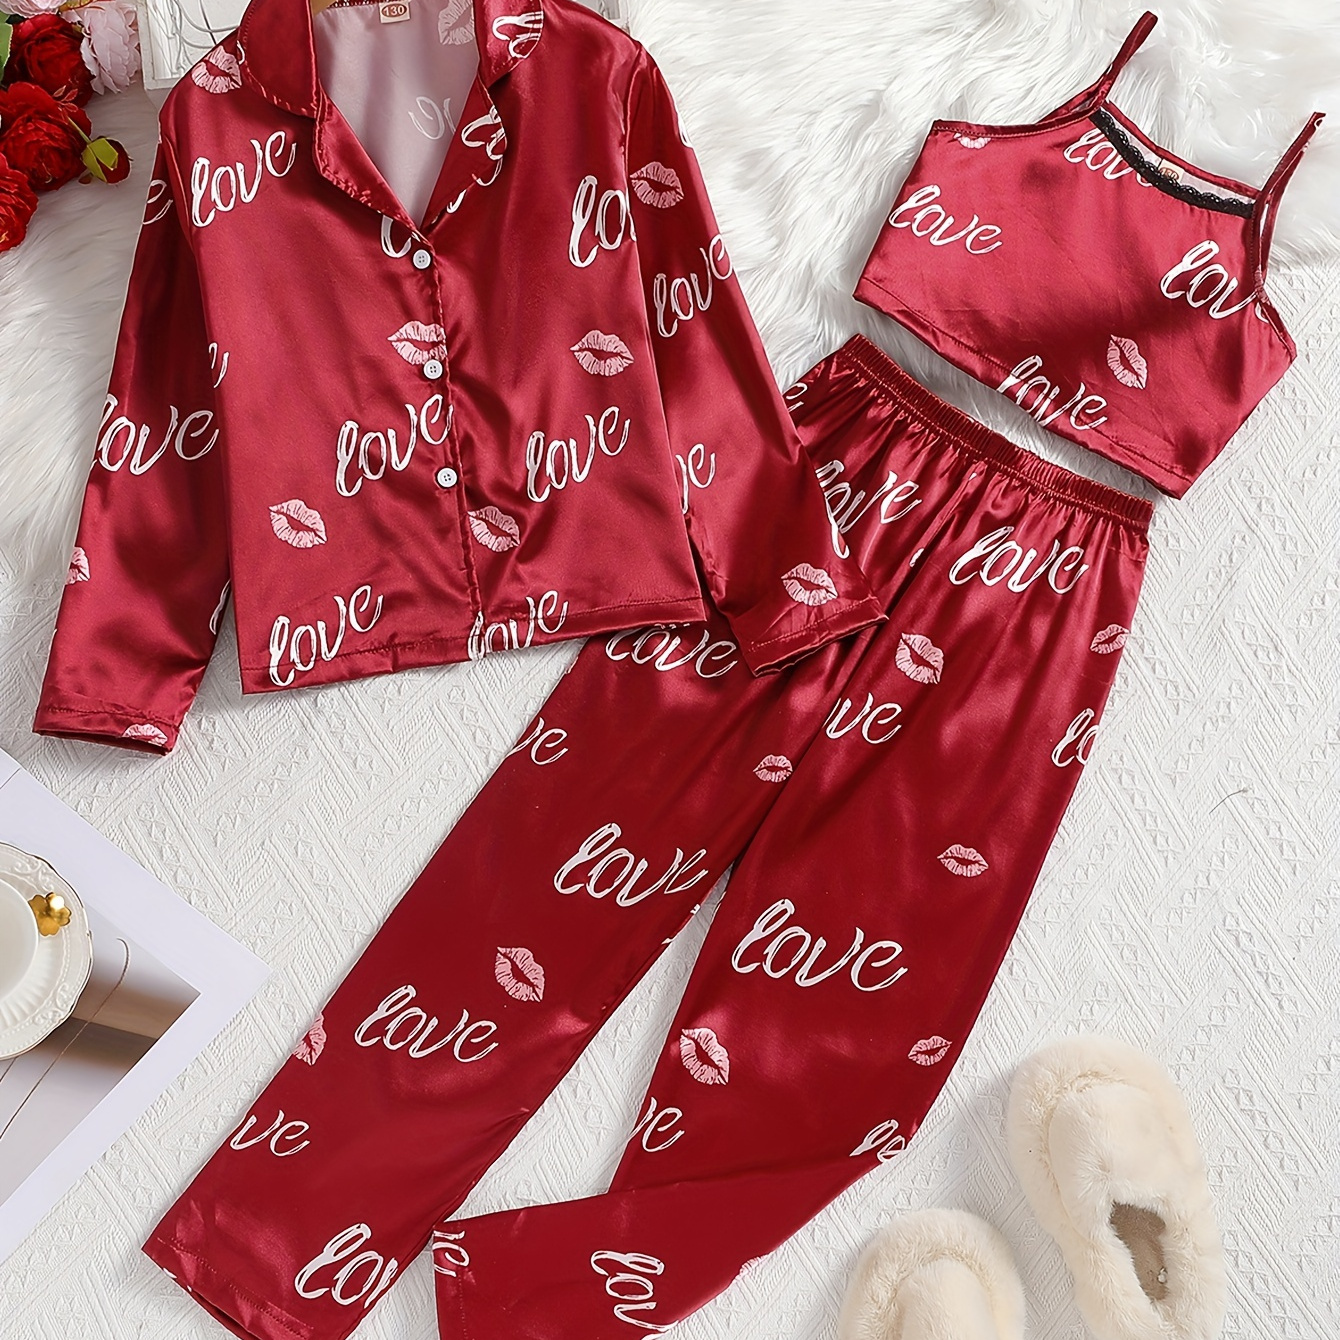 

3pcs Girl's Lips & Love Graphic Satin Pajama Set, Comfy Button Up Long Sleeve Shirt & Lace Trim Camisole & Matching Pants Set, Loungewear For All Seasons